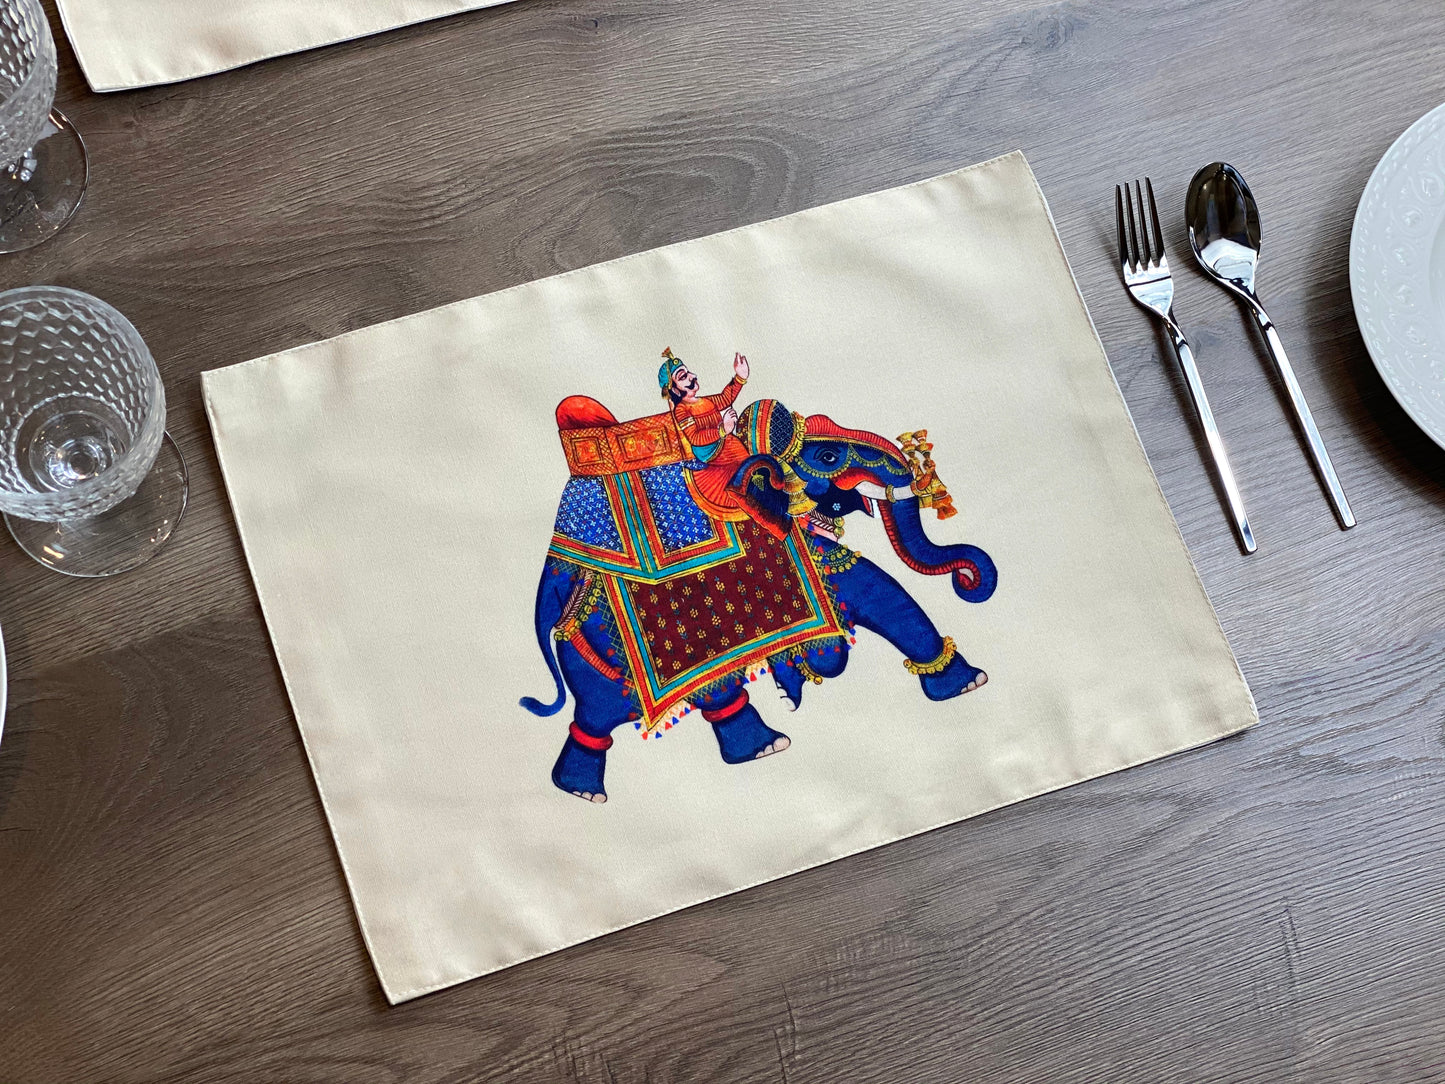 Set of 4 Vintage blue elephant placemat, artistic, colorful, art painting pattern, Decorative Washable Placemat for fall dining table